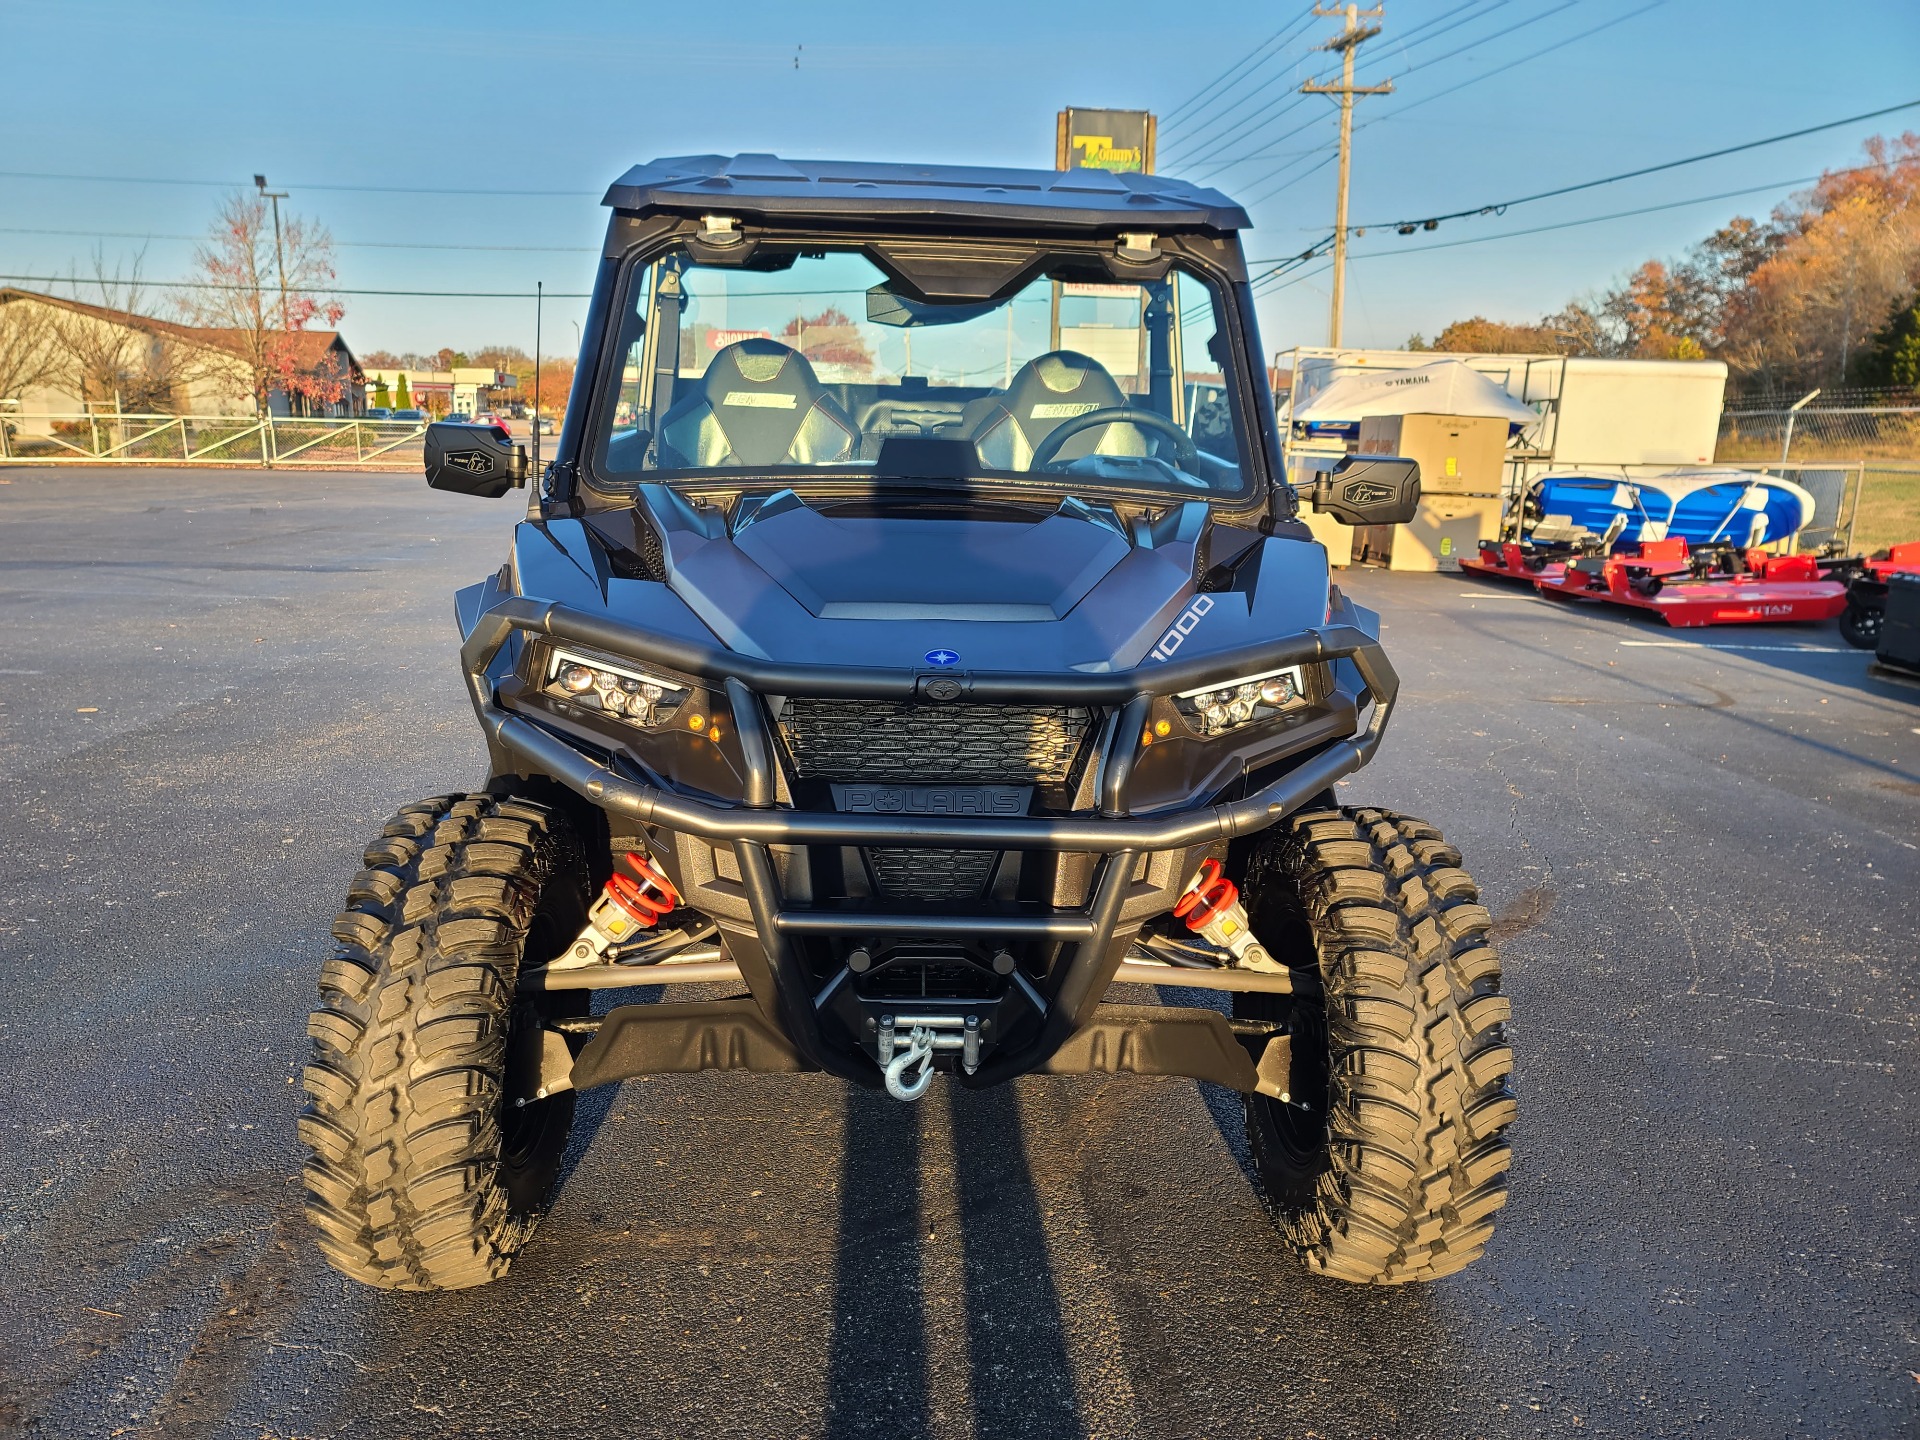 2021 Polaris General XP 1000 Deluxe in Clinton, Tennessee - Photo 2